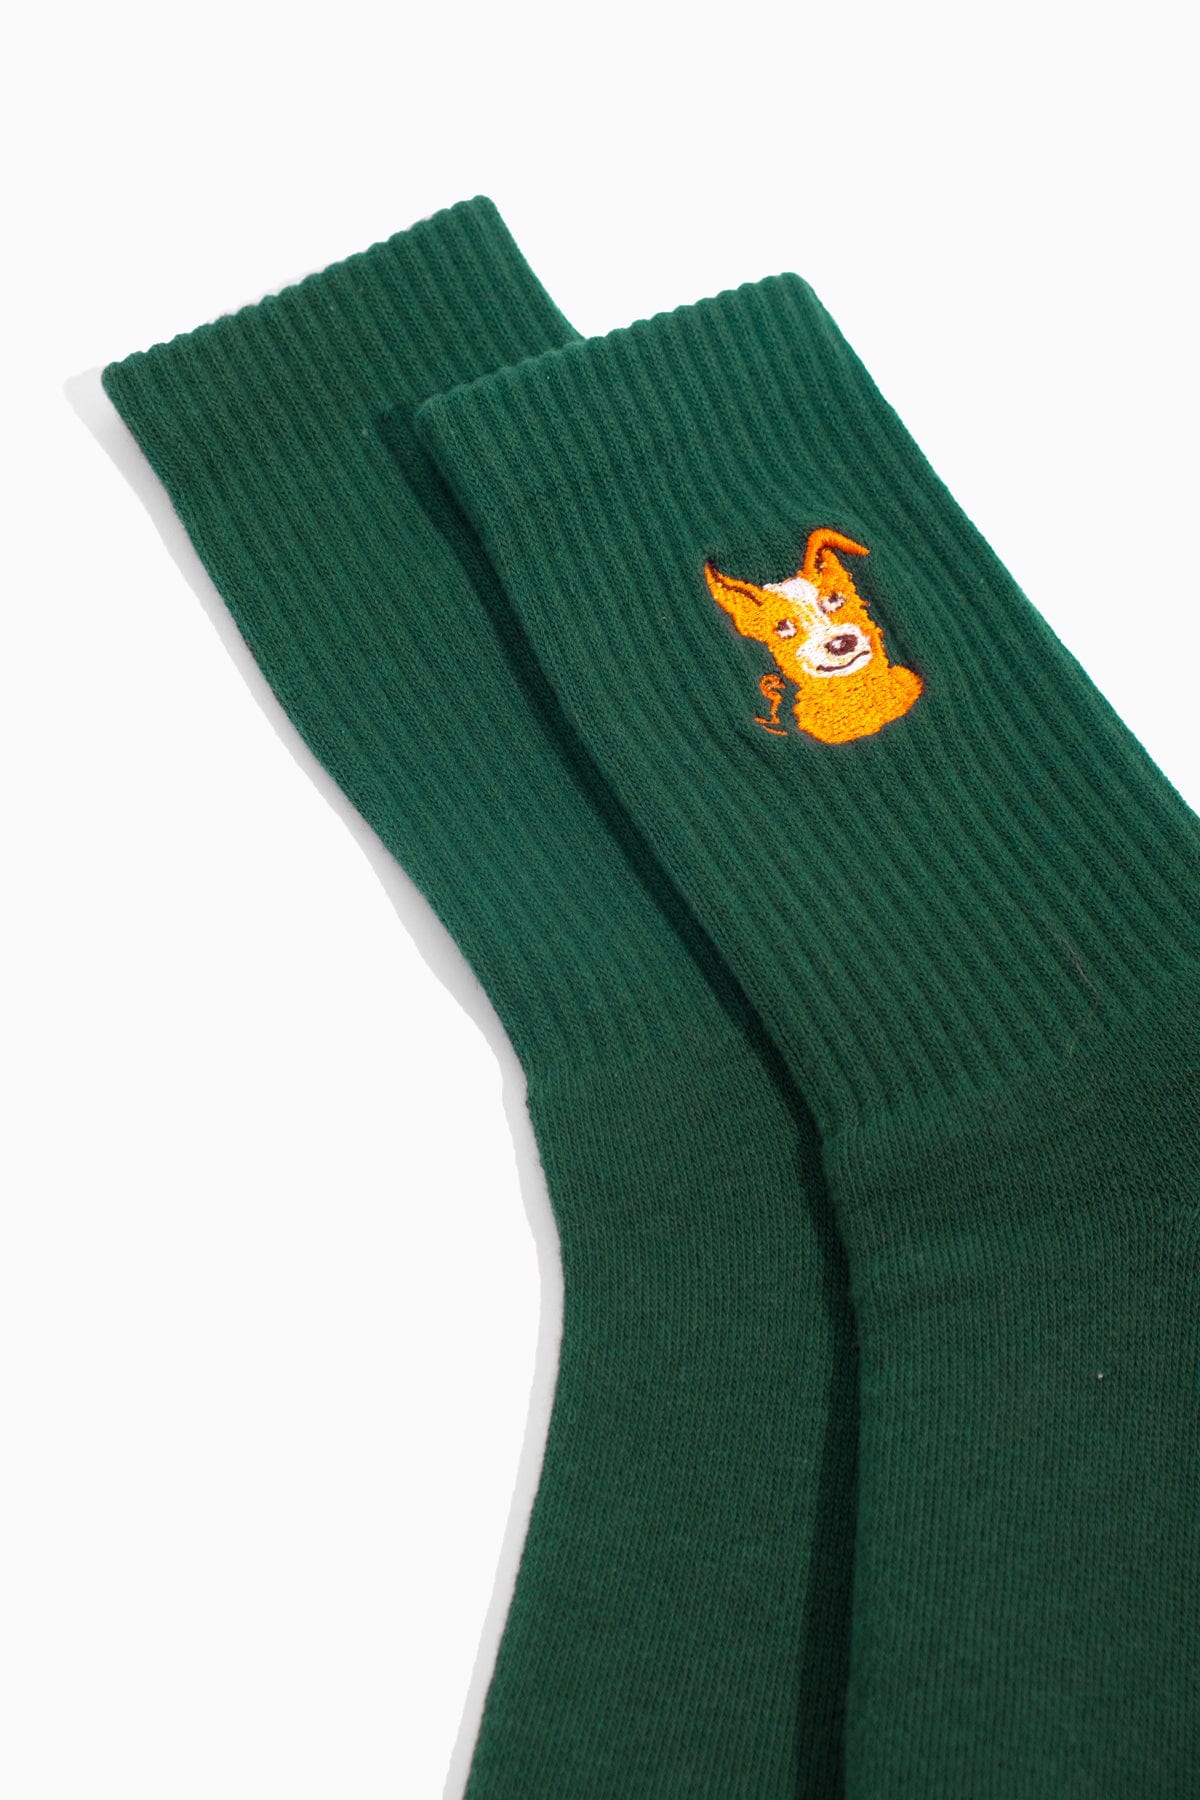 Swoopy Bois Crew Sock - 3 Pack